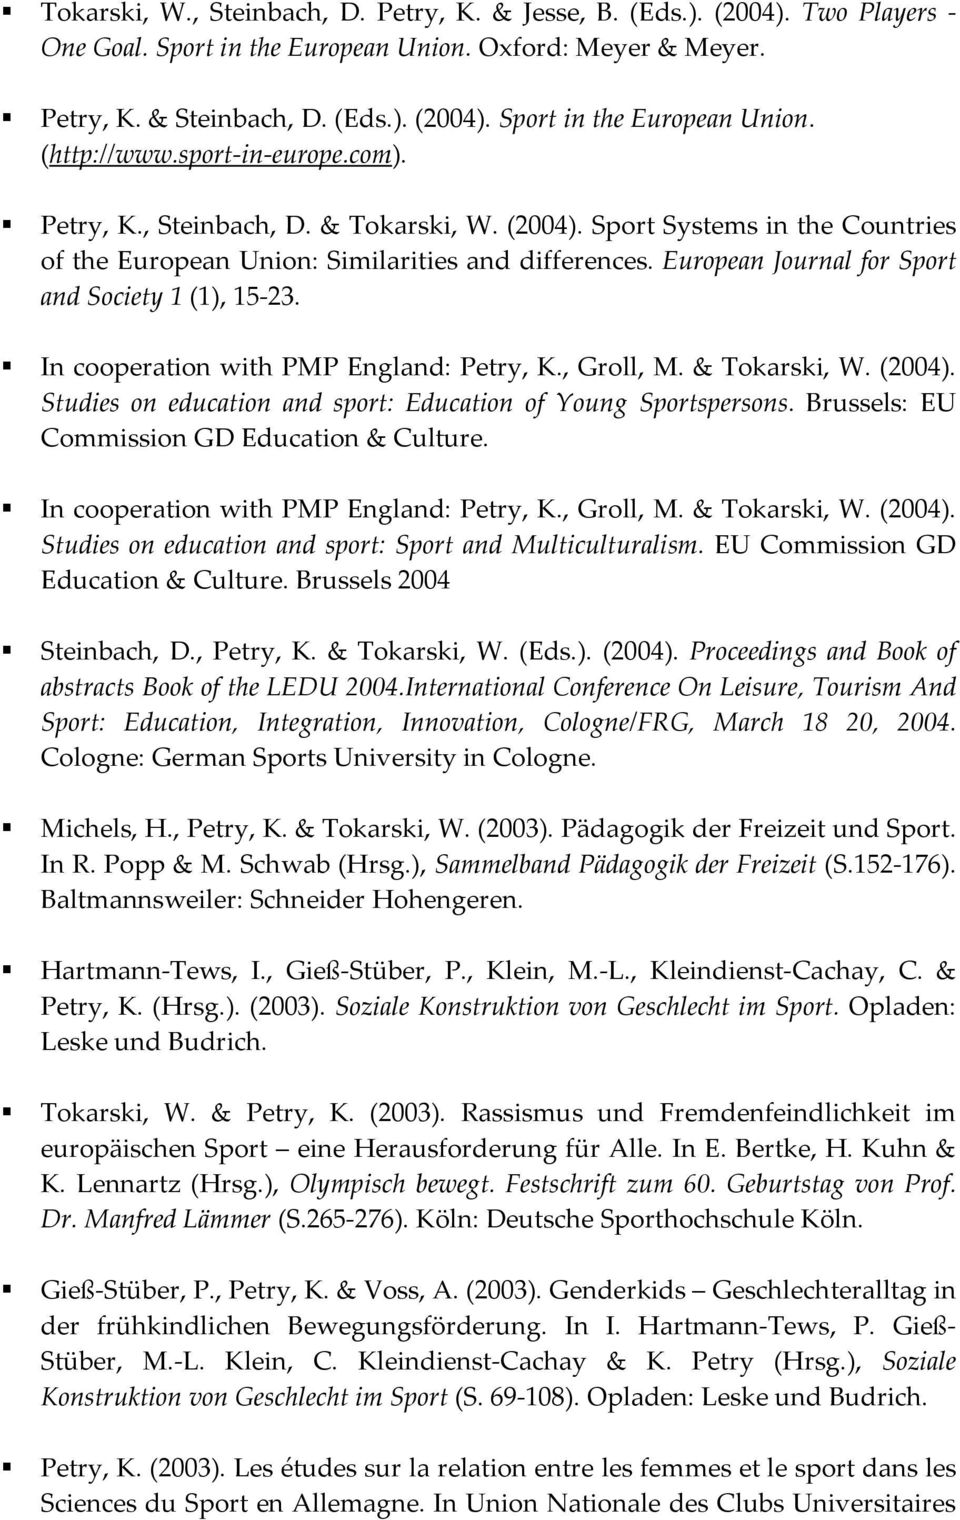 European Journal for Sport and Society 1 (1), 15-23. In cooperation with PMP England: Petry, K., Groll, M. & Tokarski, W. (2004). Studies on education and sport: Education of Young Sportspersons.